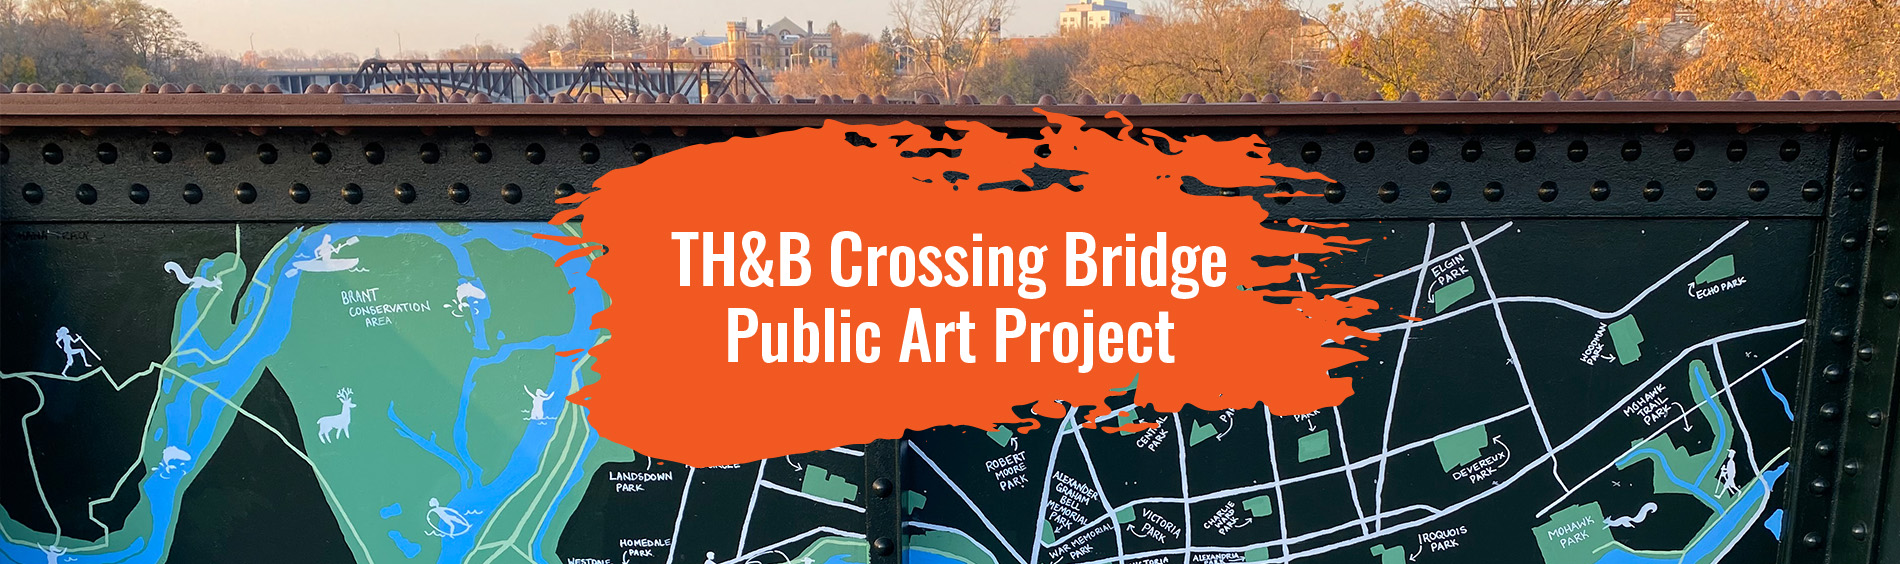 TH&B Crossing with the artwork TH&B Public Art Project